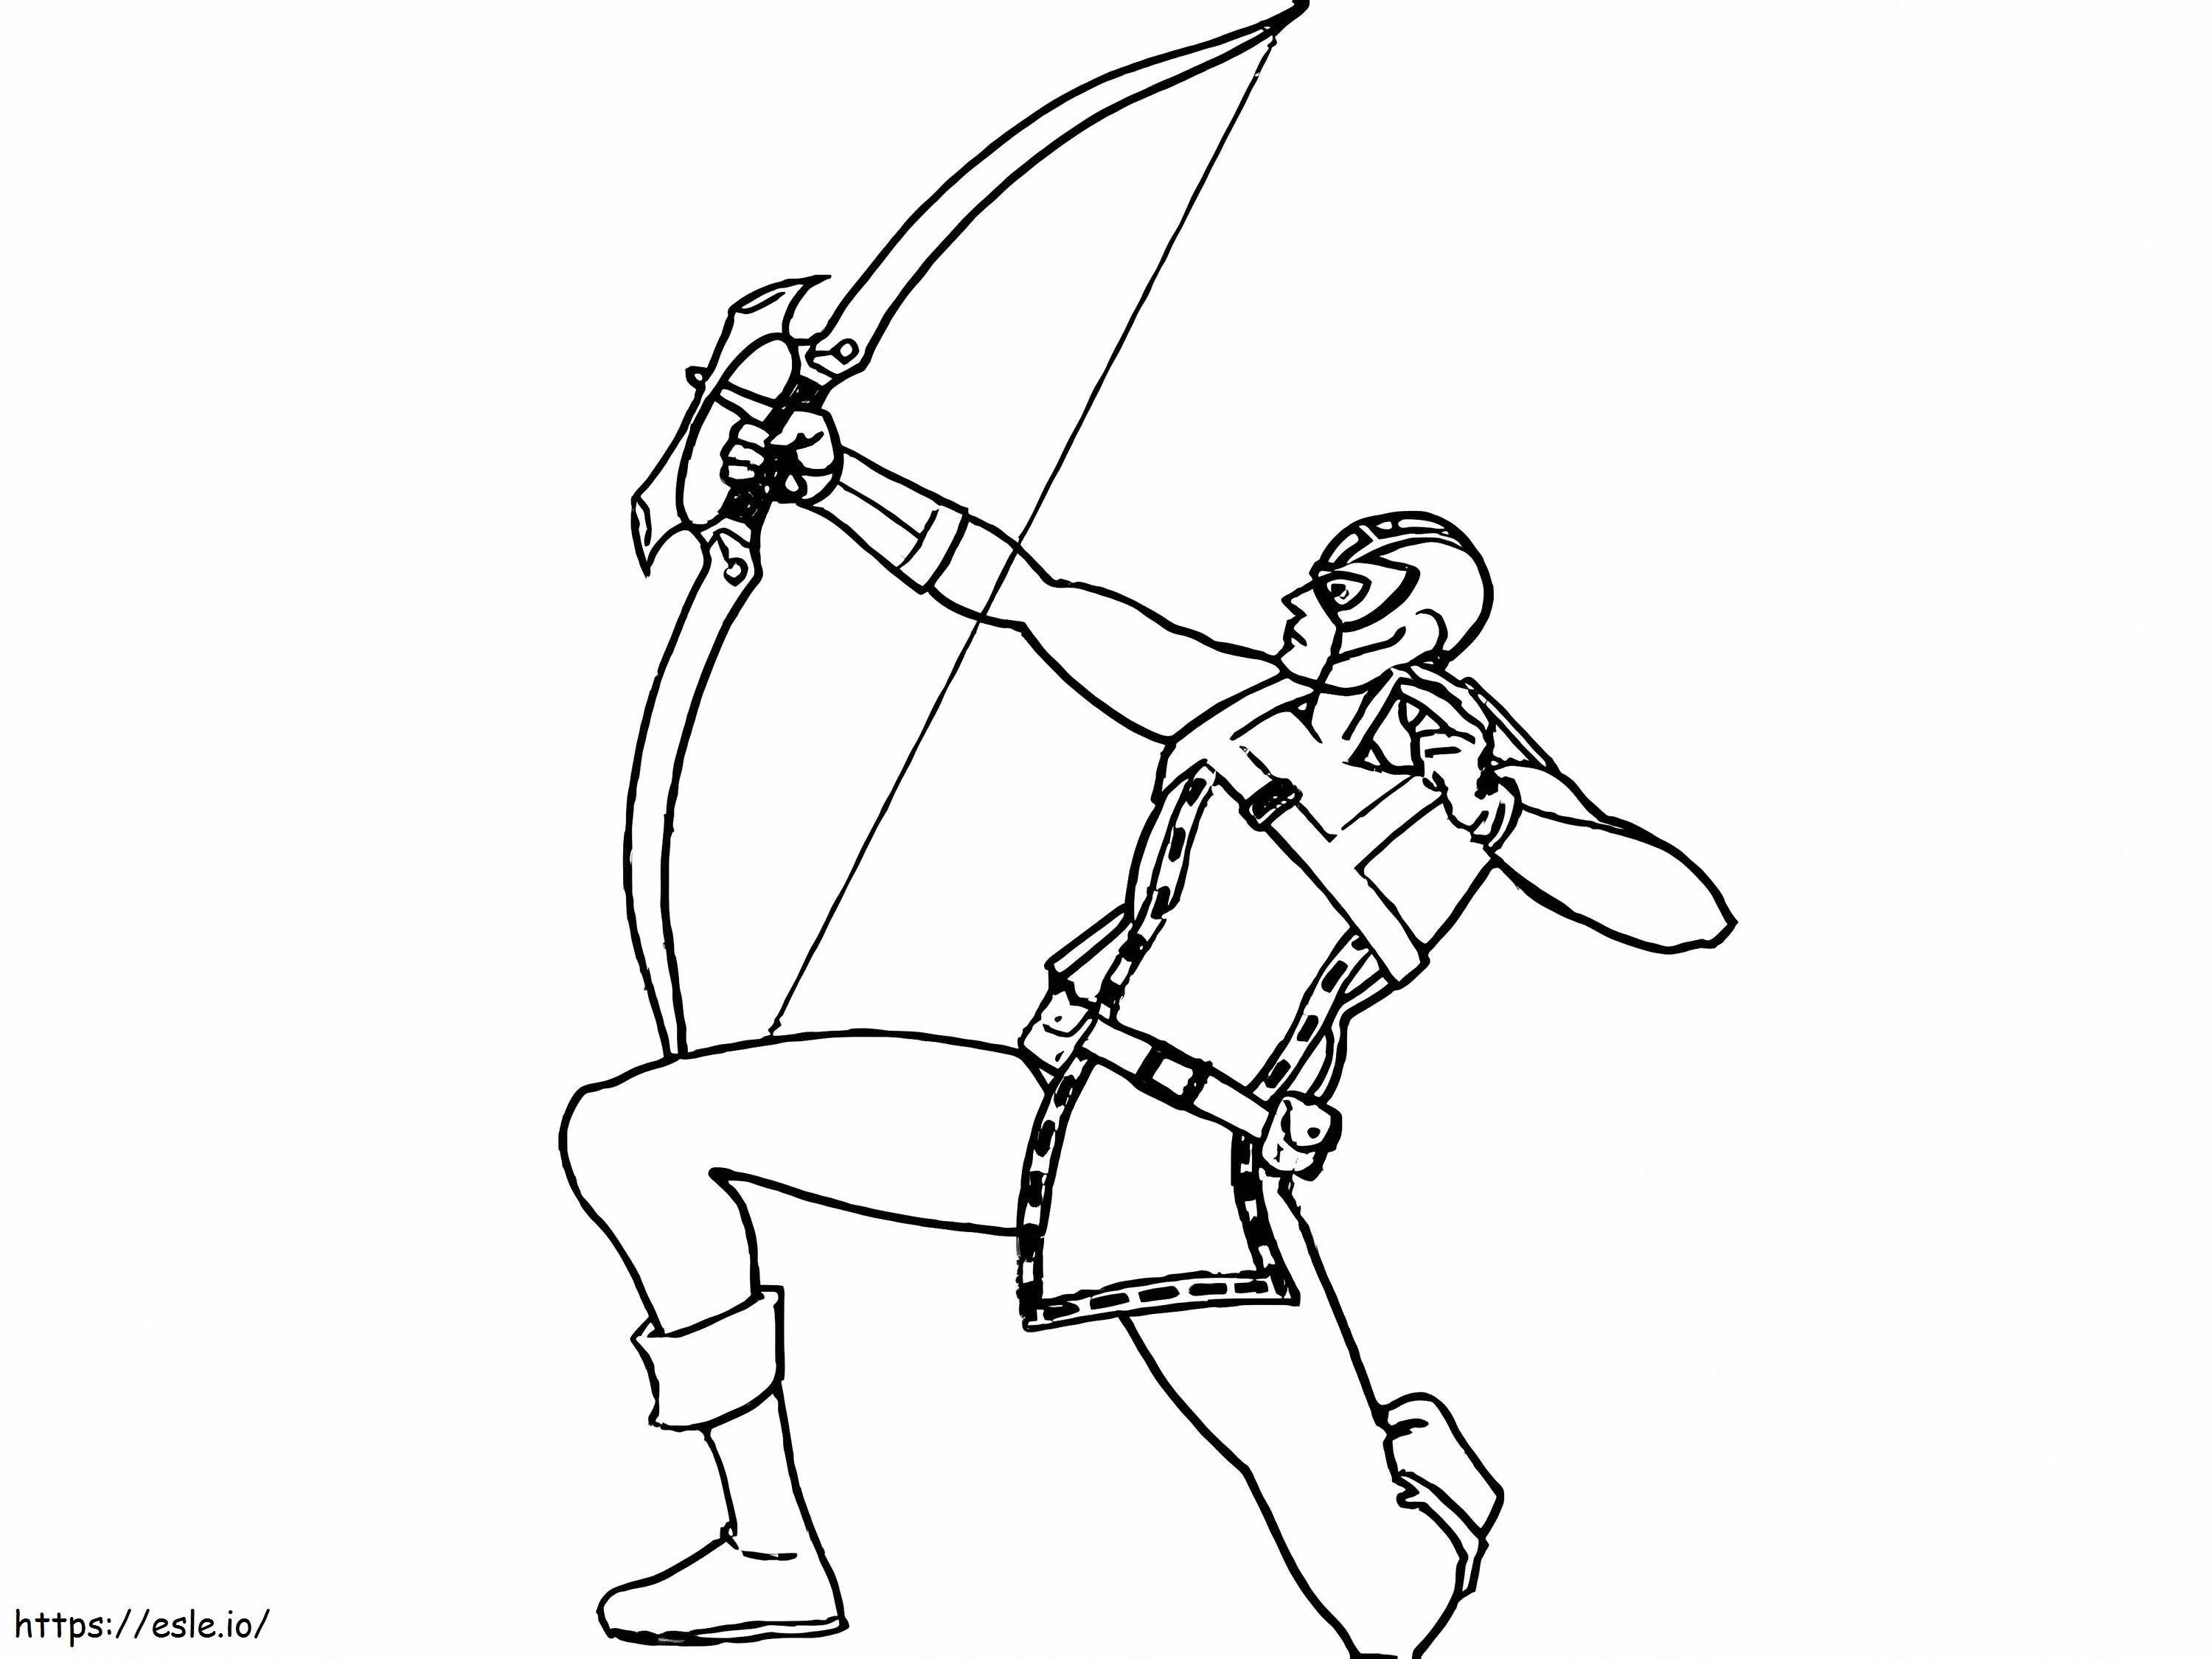 Hawkeye Attack coloring page